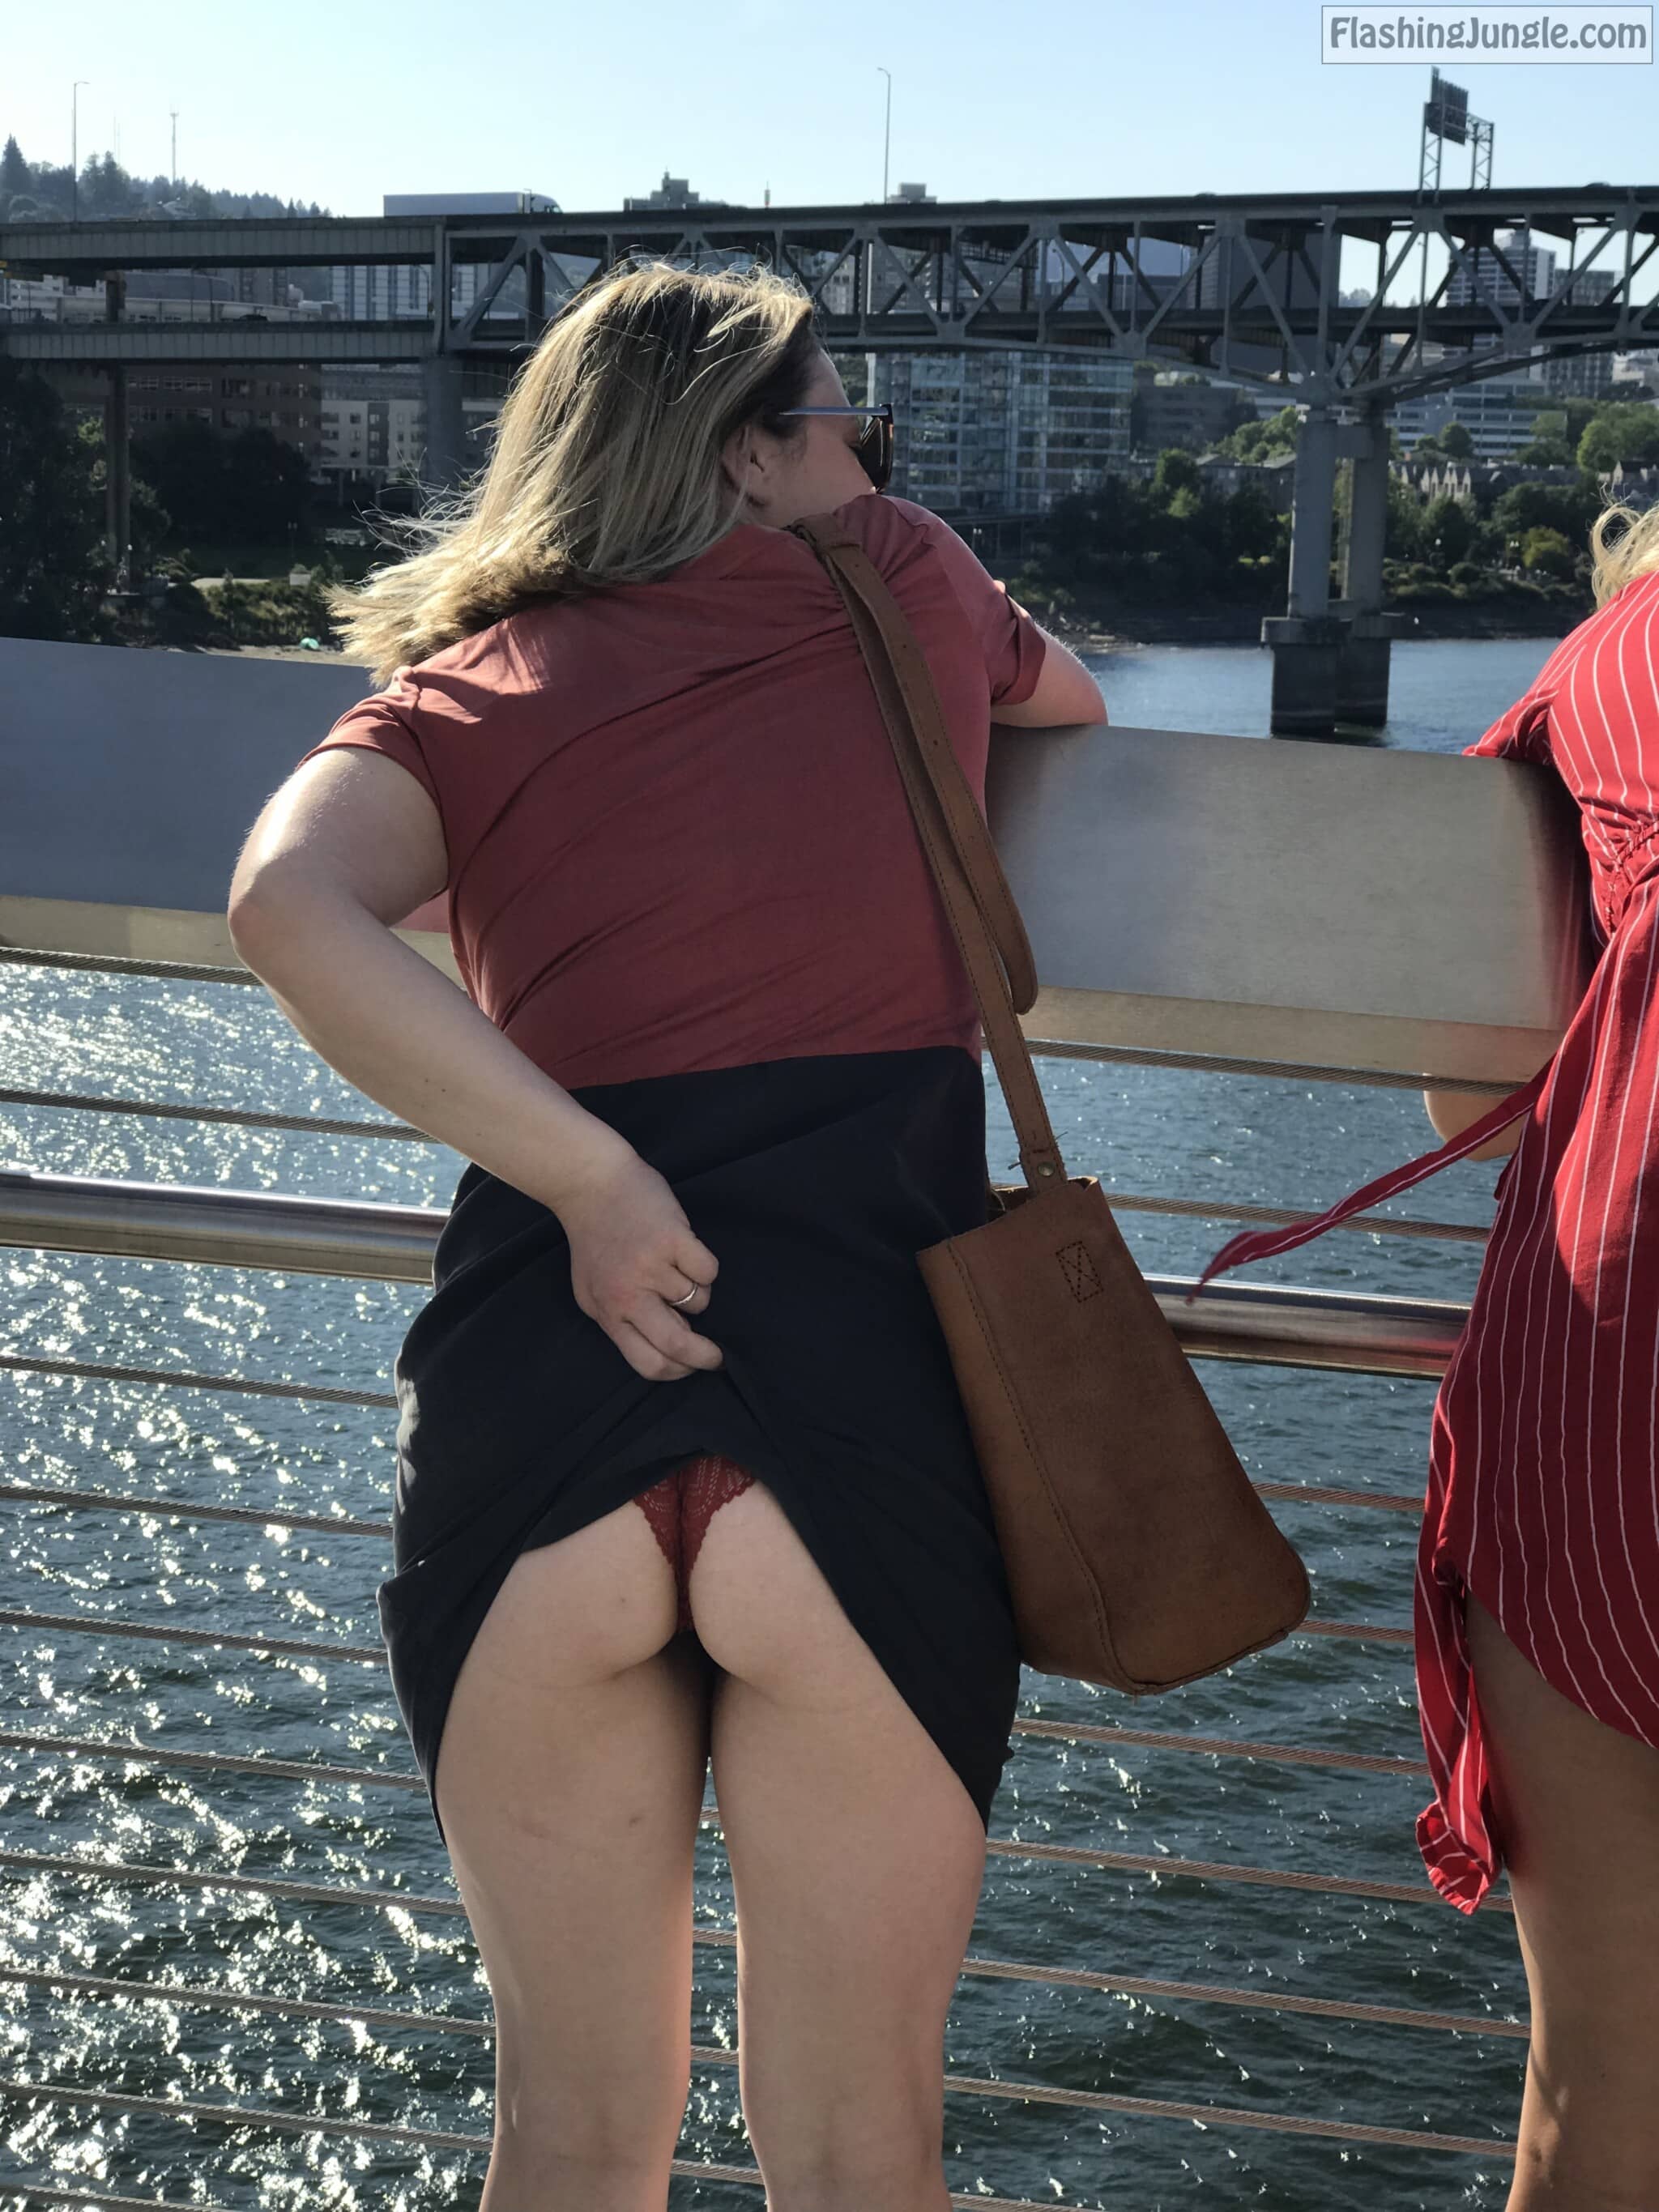 my chubby wife bottomless public - Thing flash Fun public flash - Real Amateurs